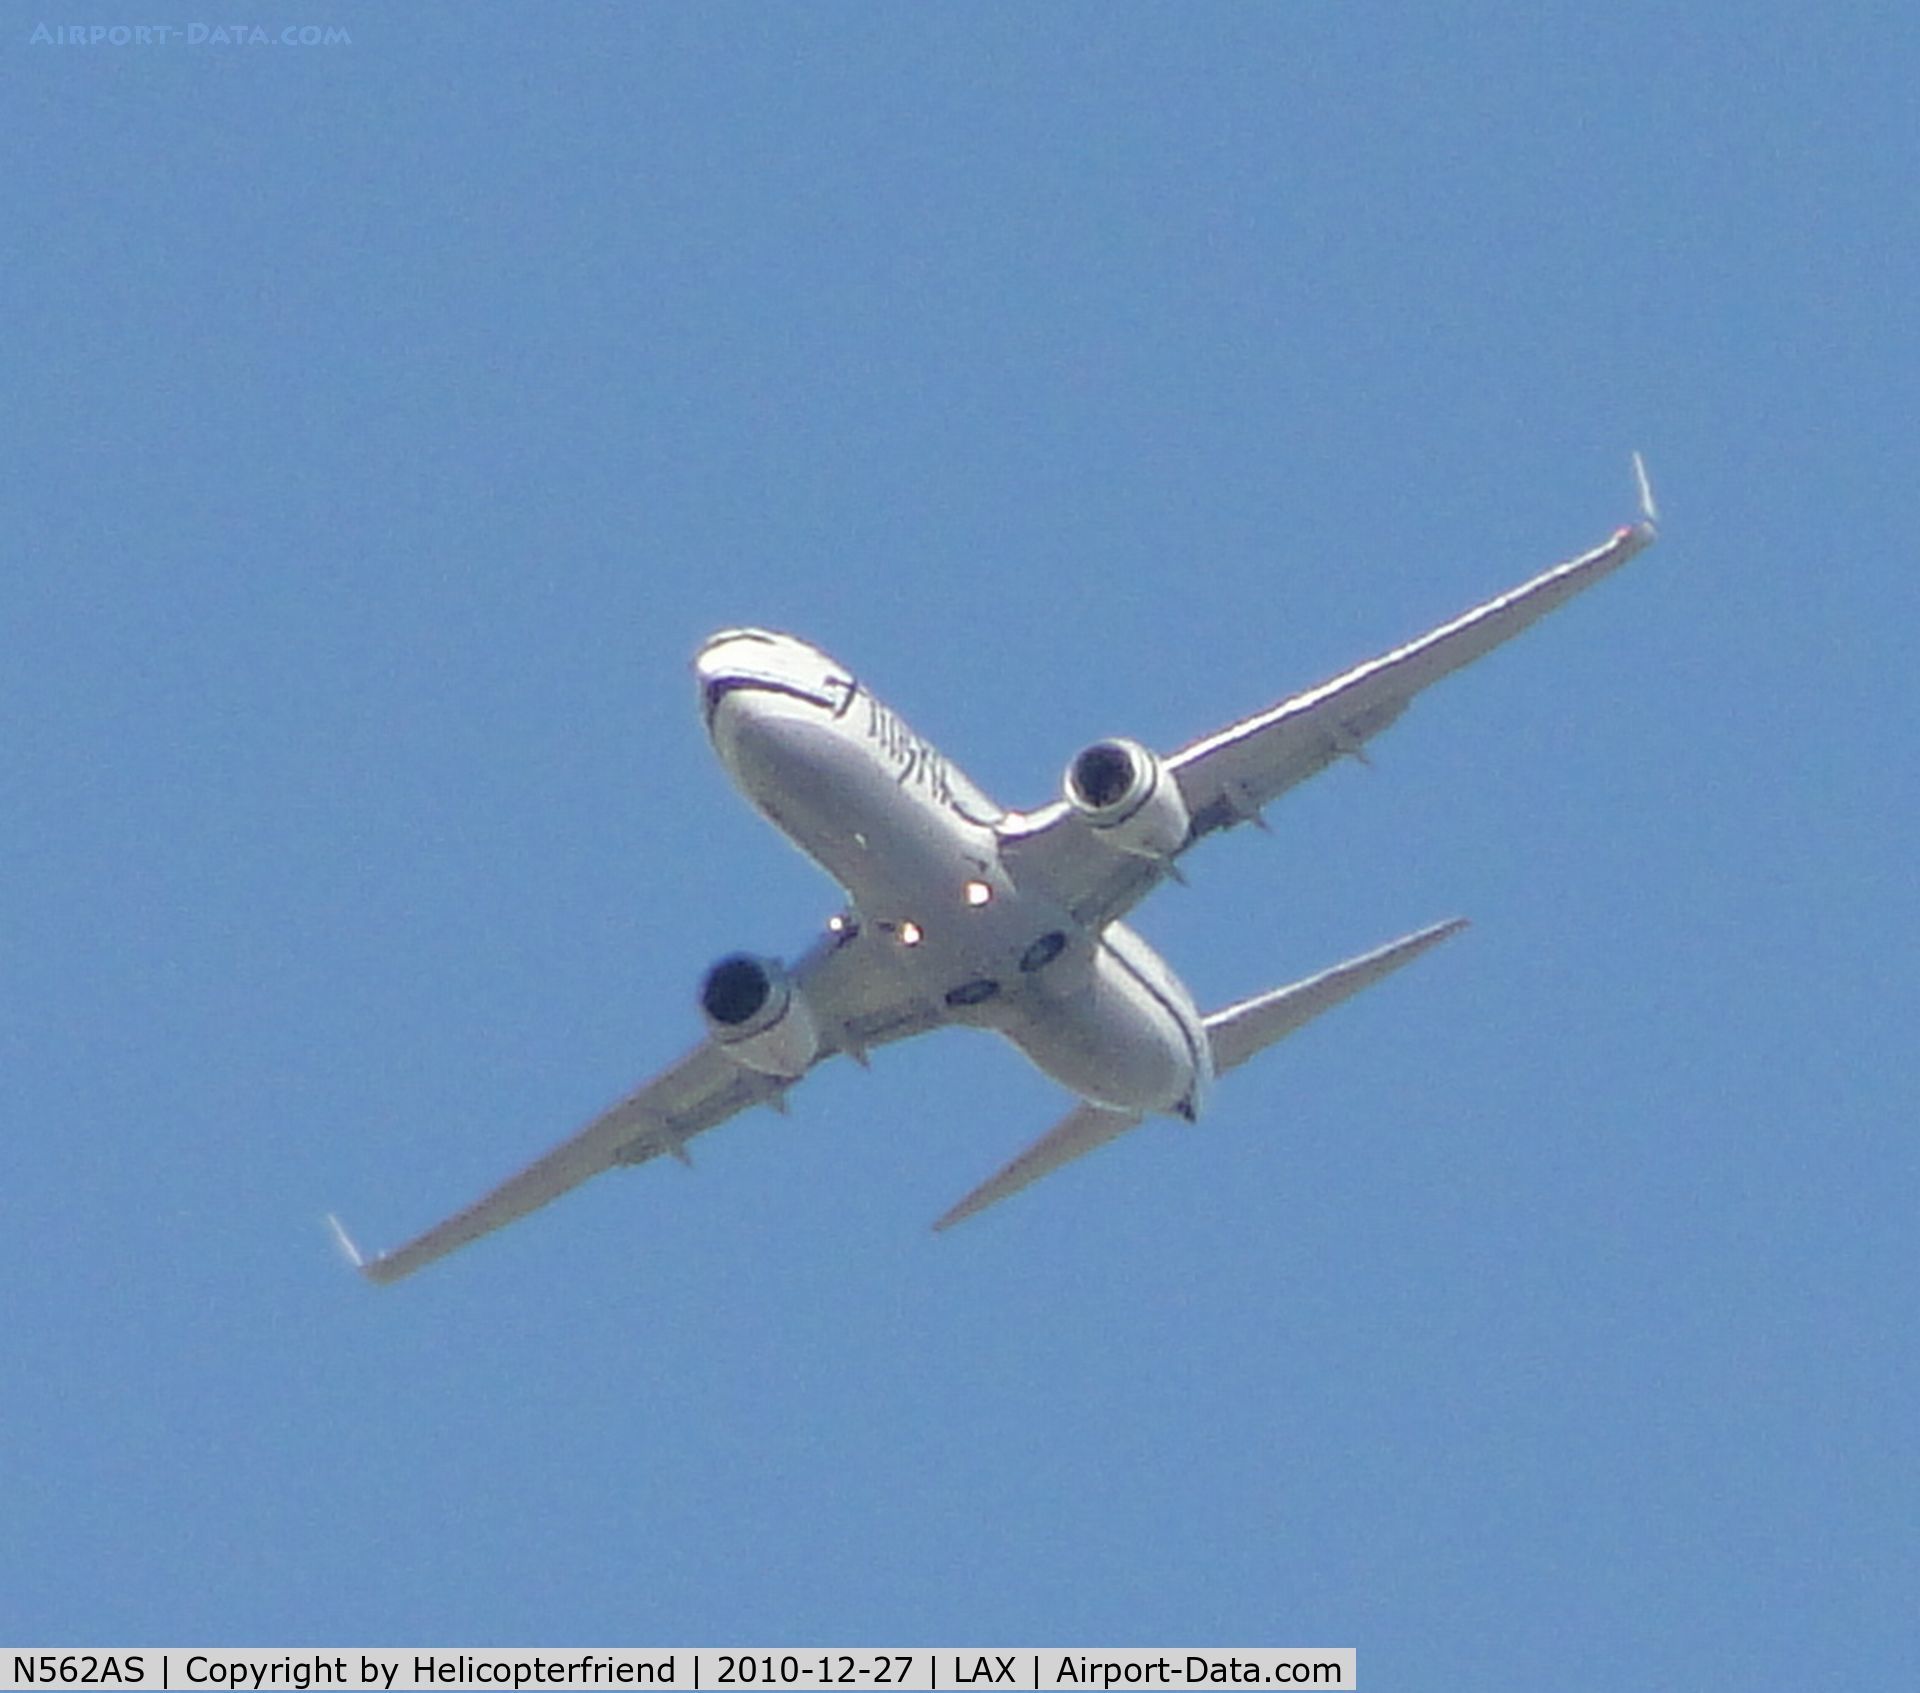 N562AS, 2006 Boeing 737-890 C/N 35091, Turning final from a northside base leg for runway 14